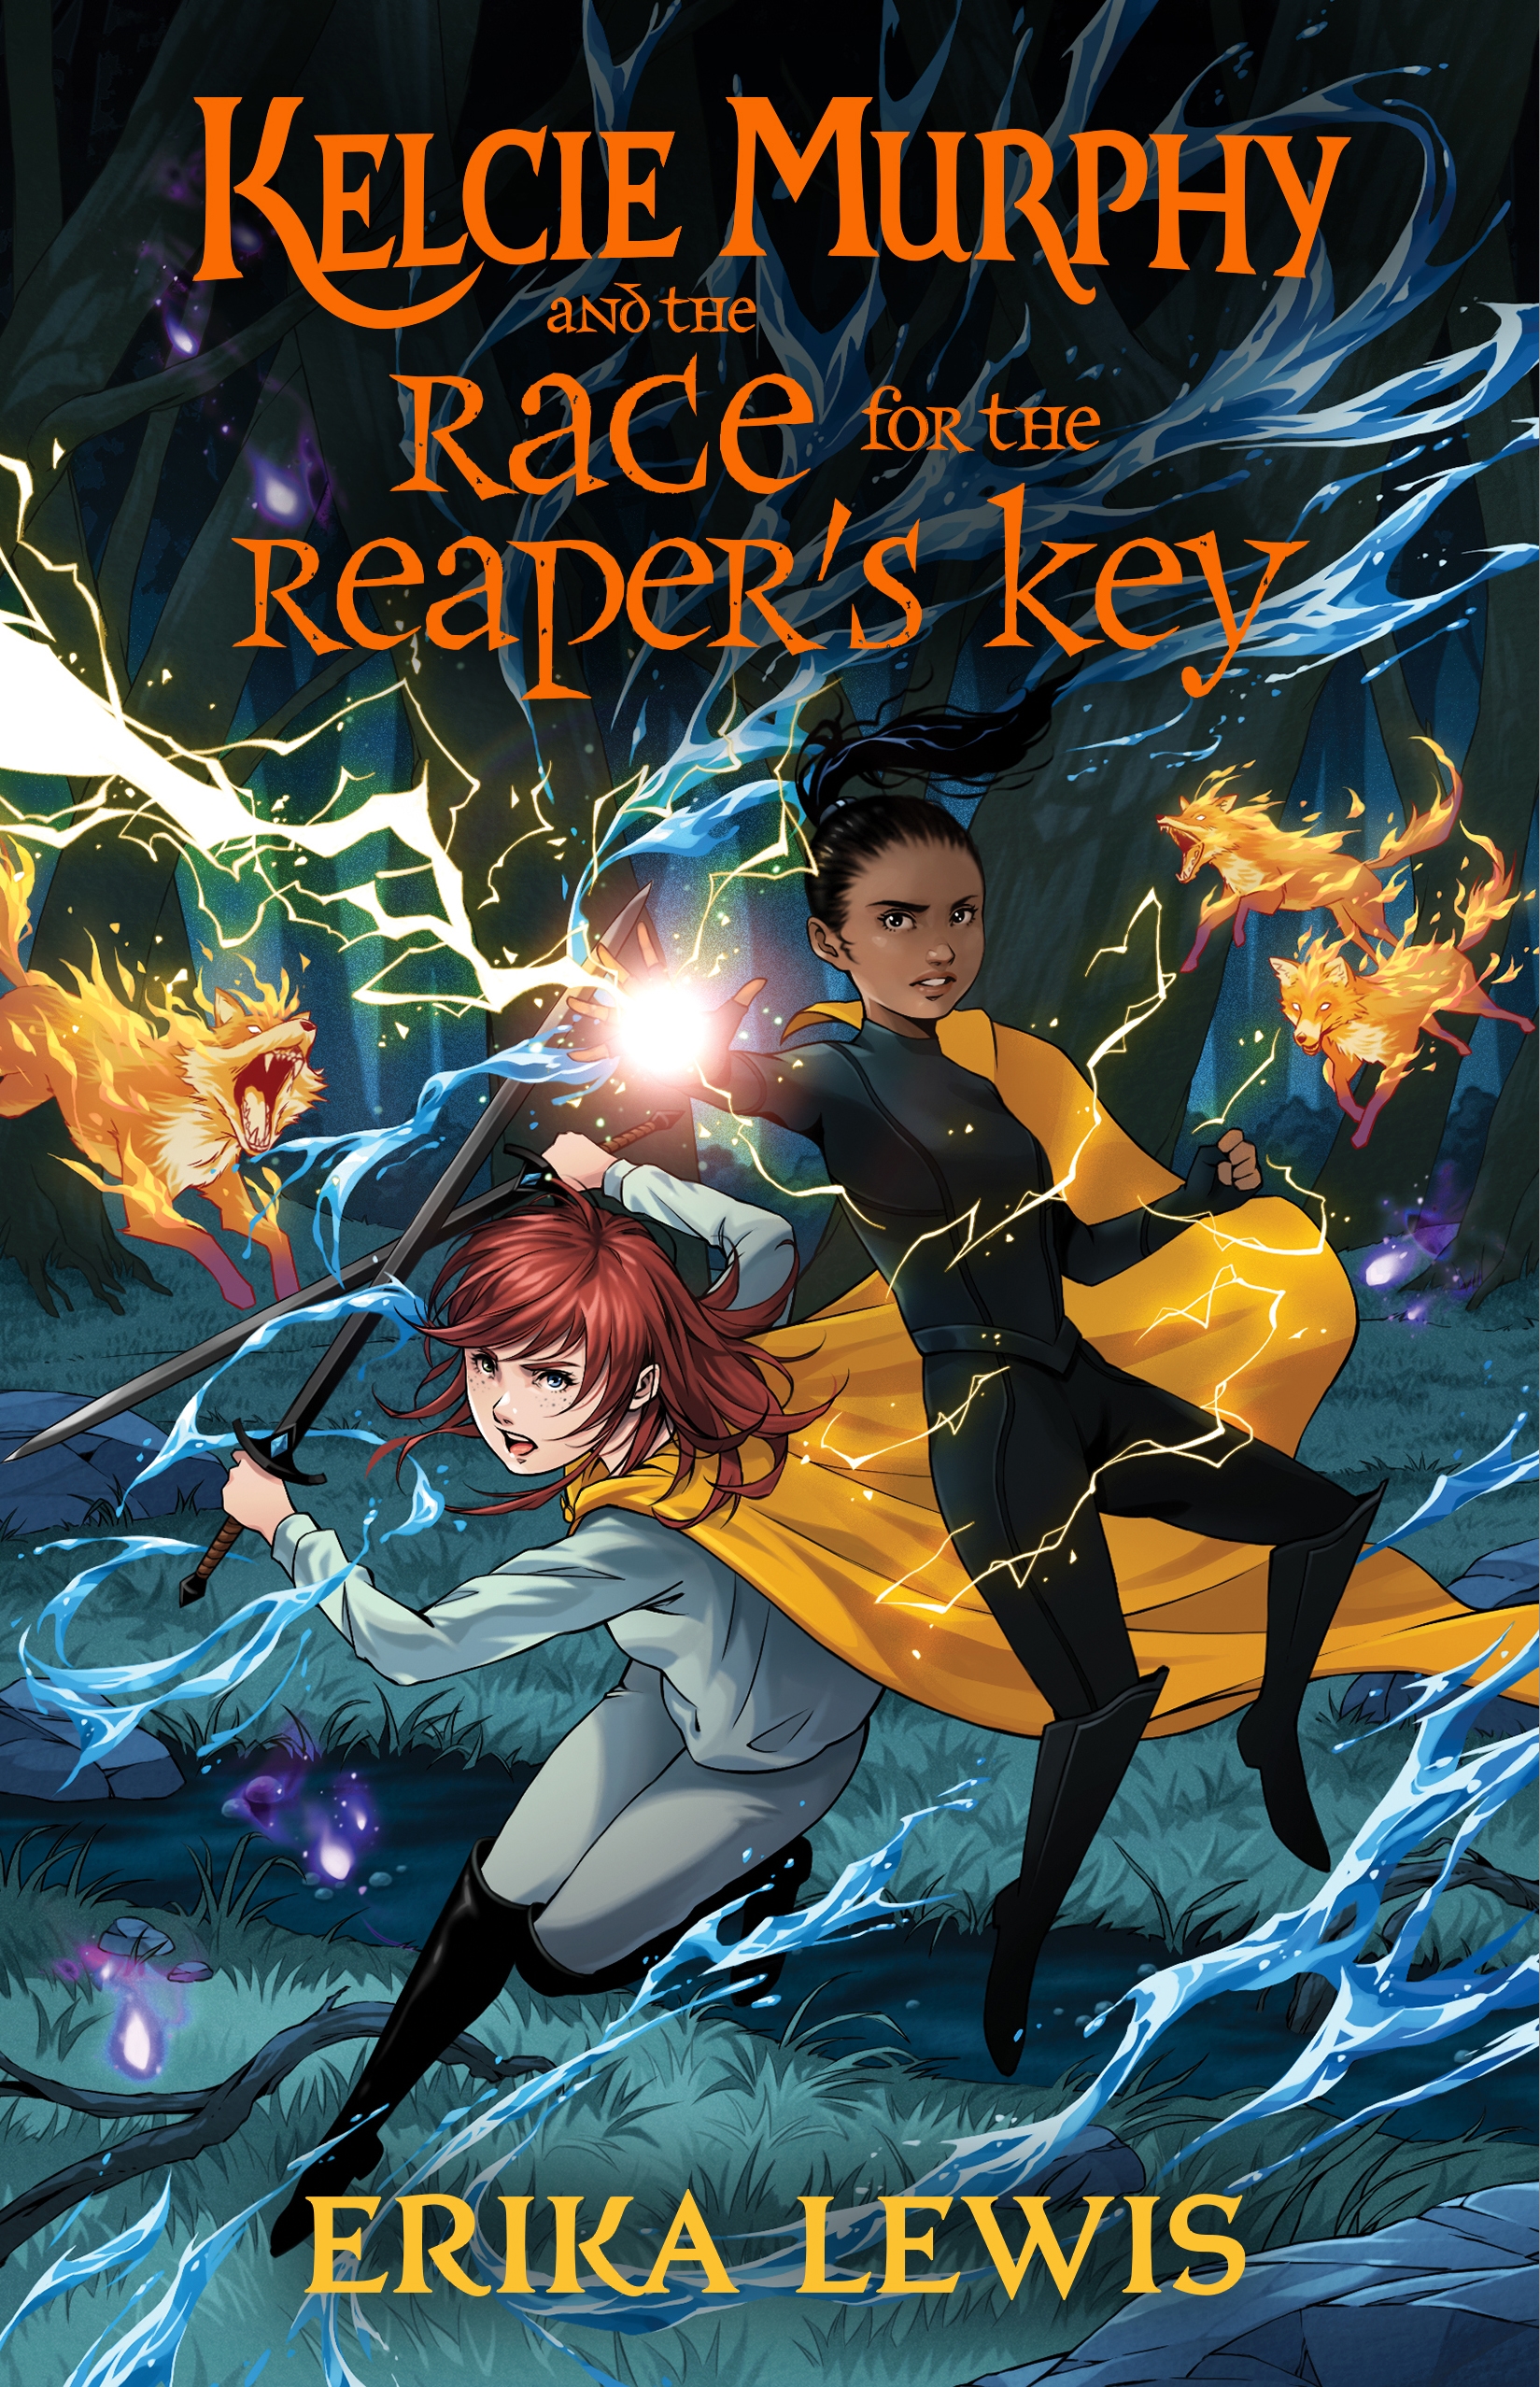 Kelcie Murphy and the Race for the Reaper's Key by Erika Lewis, Bess Cozby